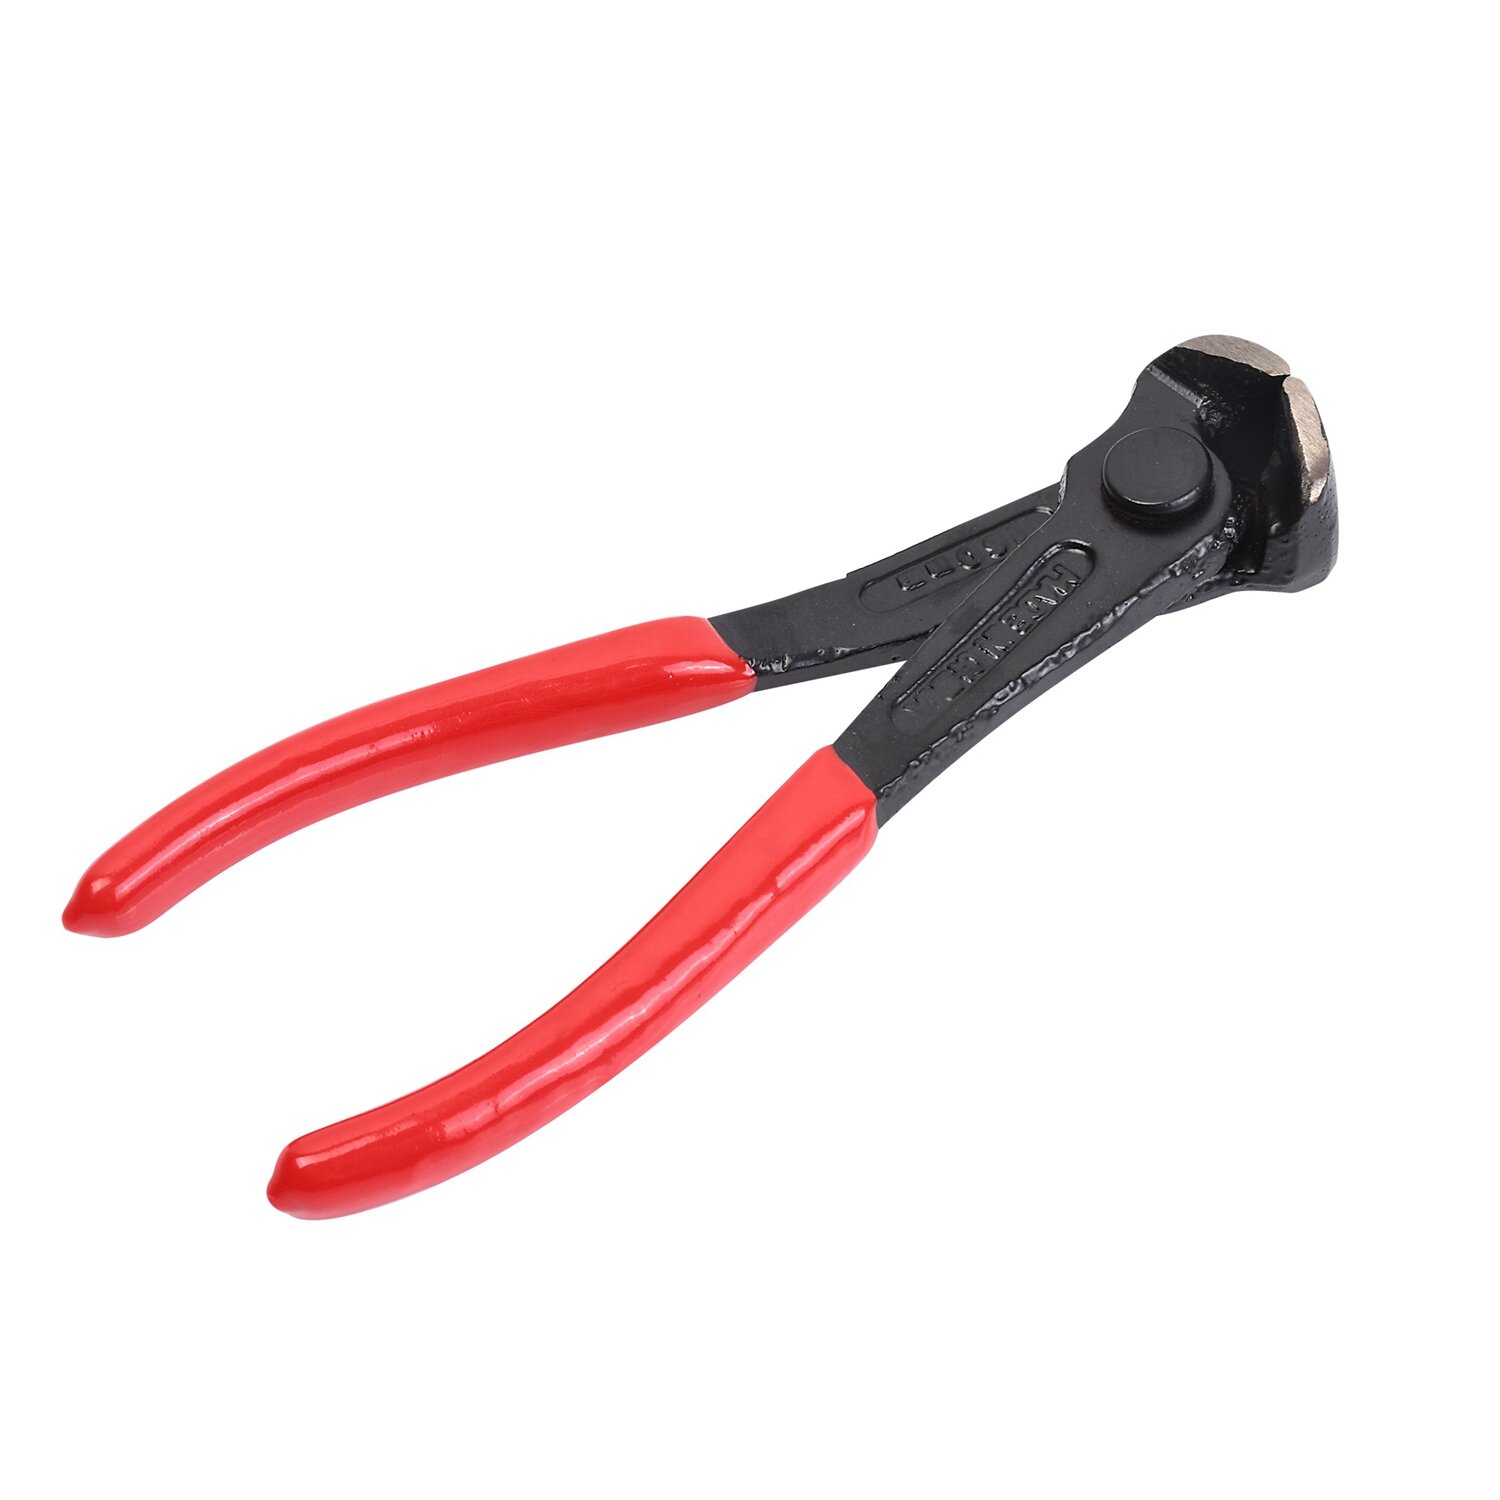 

6 Inch Professional Guitar Fret Wire End Cutter Luthier Tool Nipper Puller Plier String Scissors